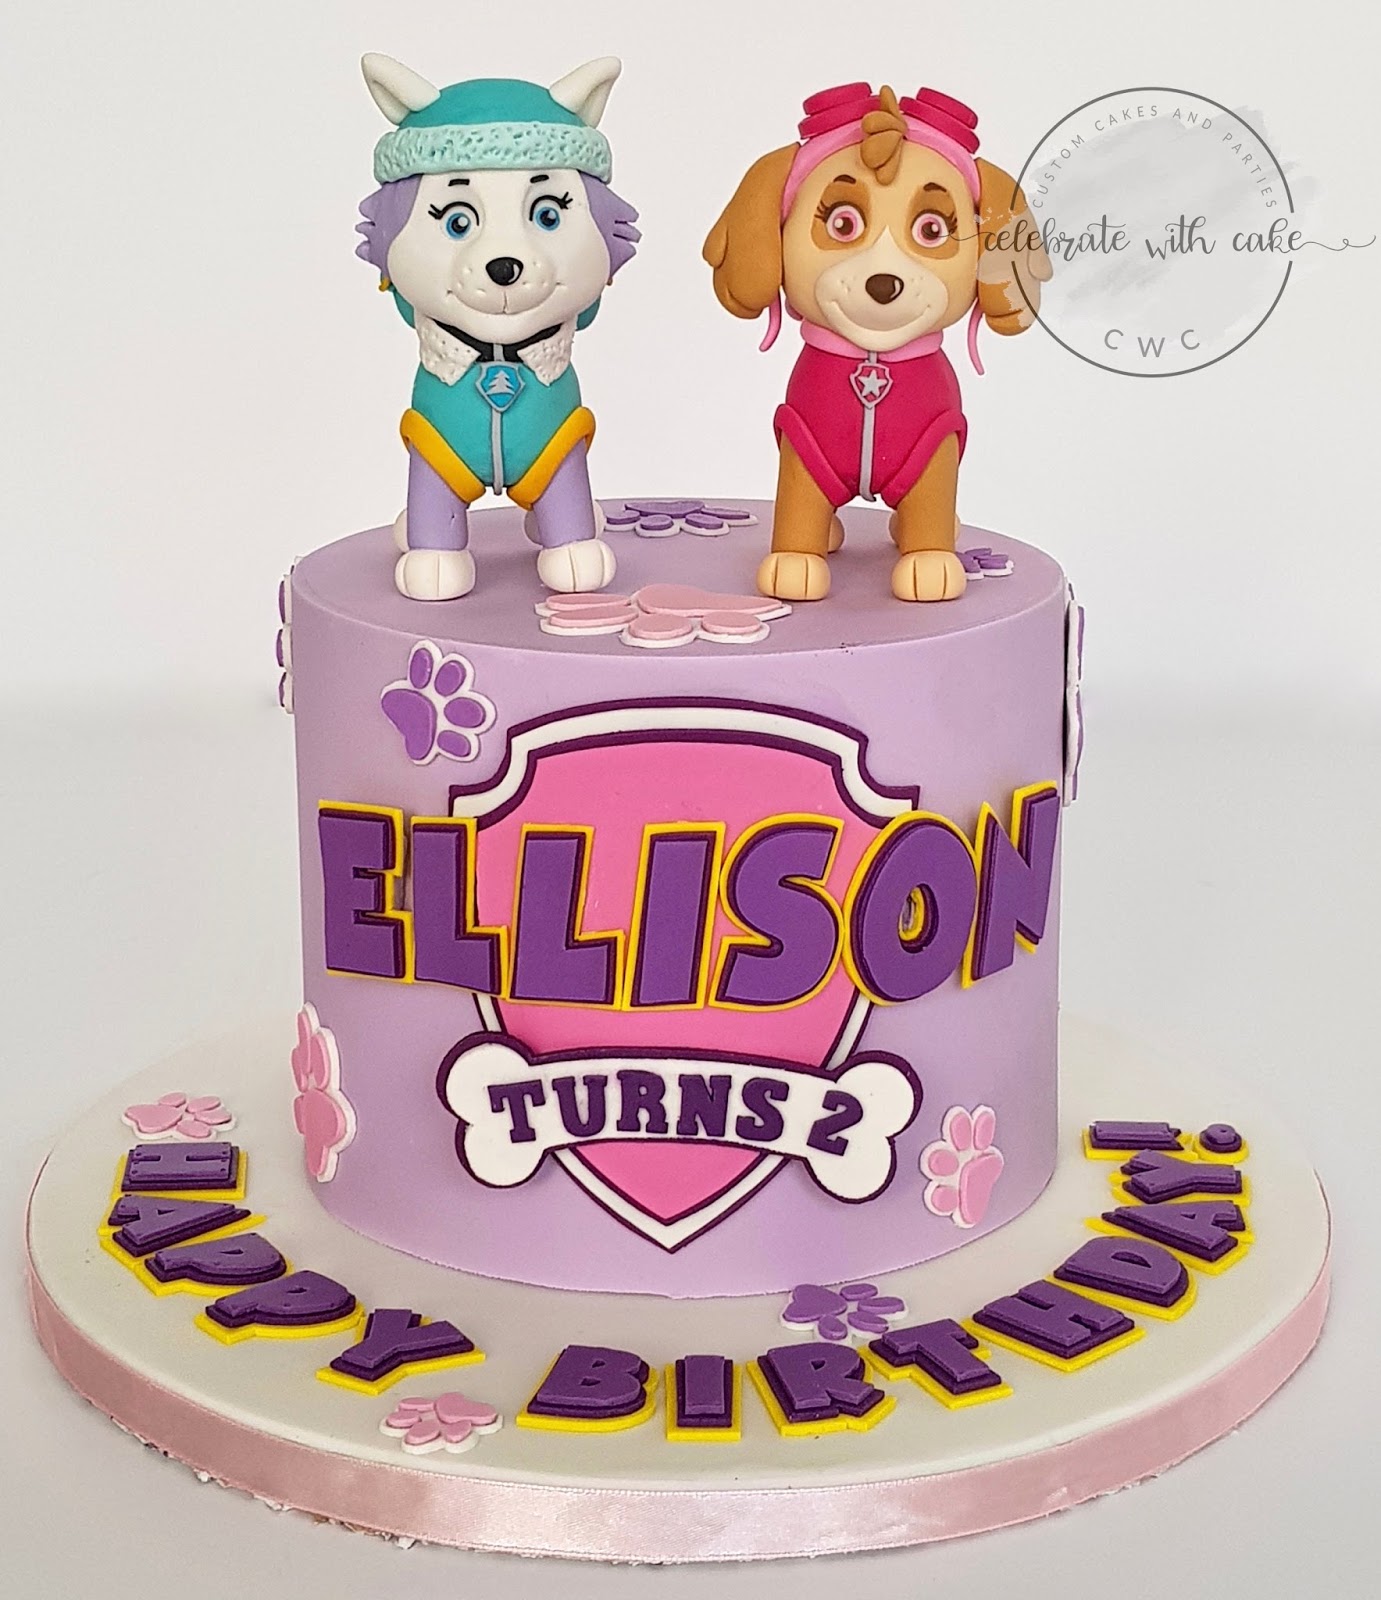 Celebrate with Cake!: Paw Patrol featuring Skye and Everest